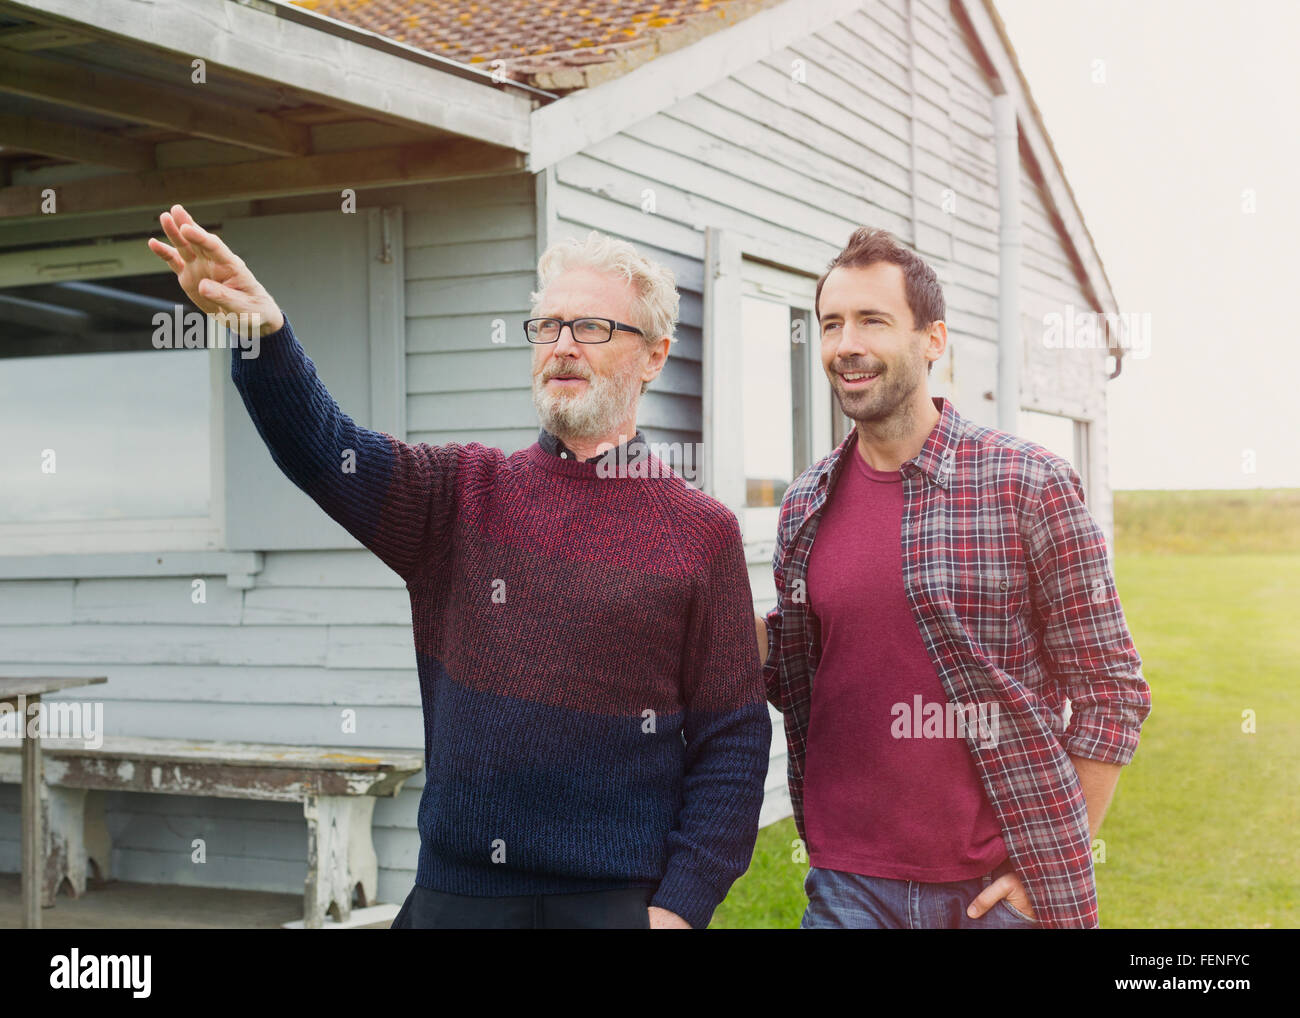 Father gesturing to son outside house Stock Photo